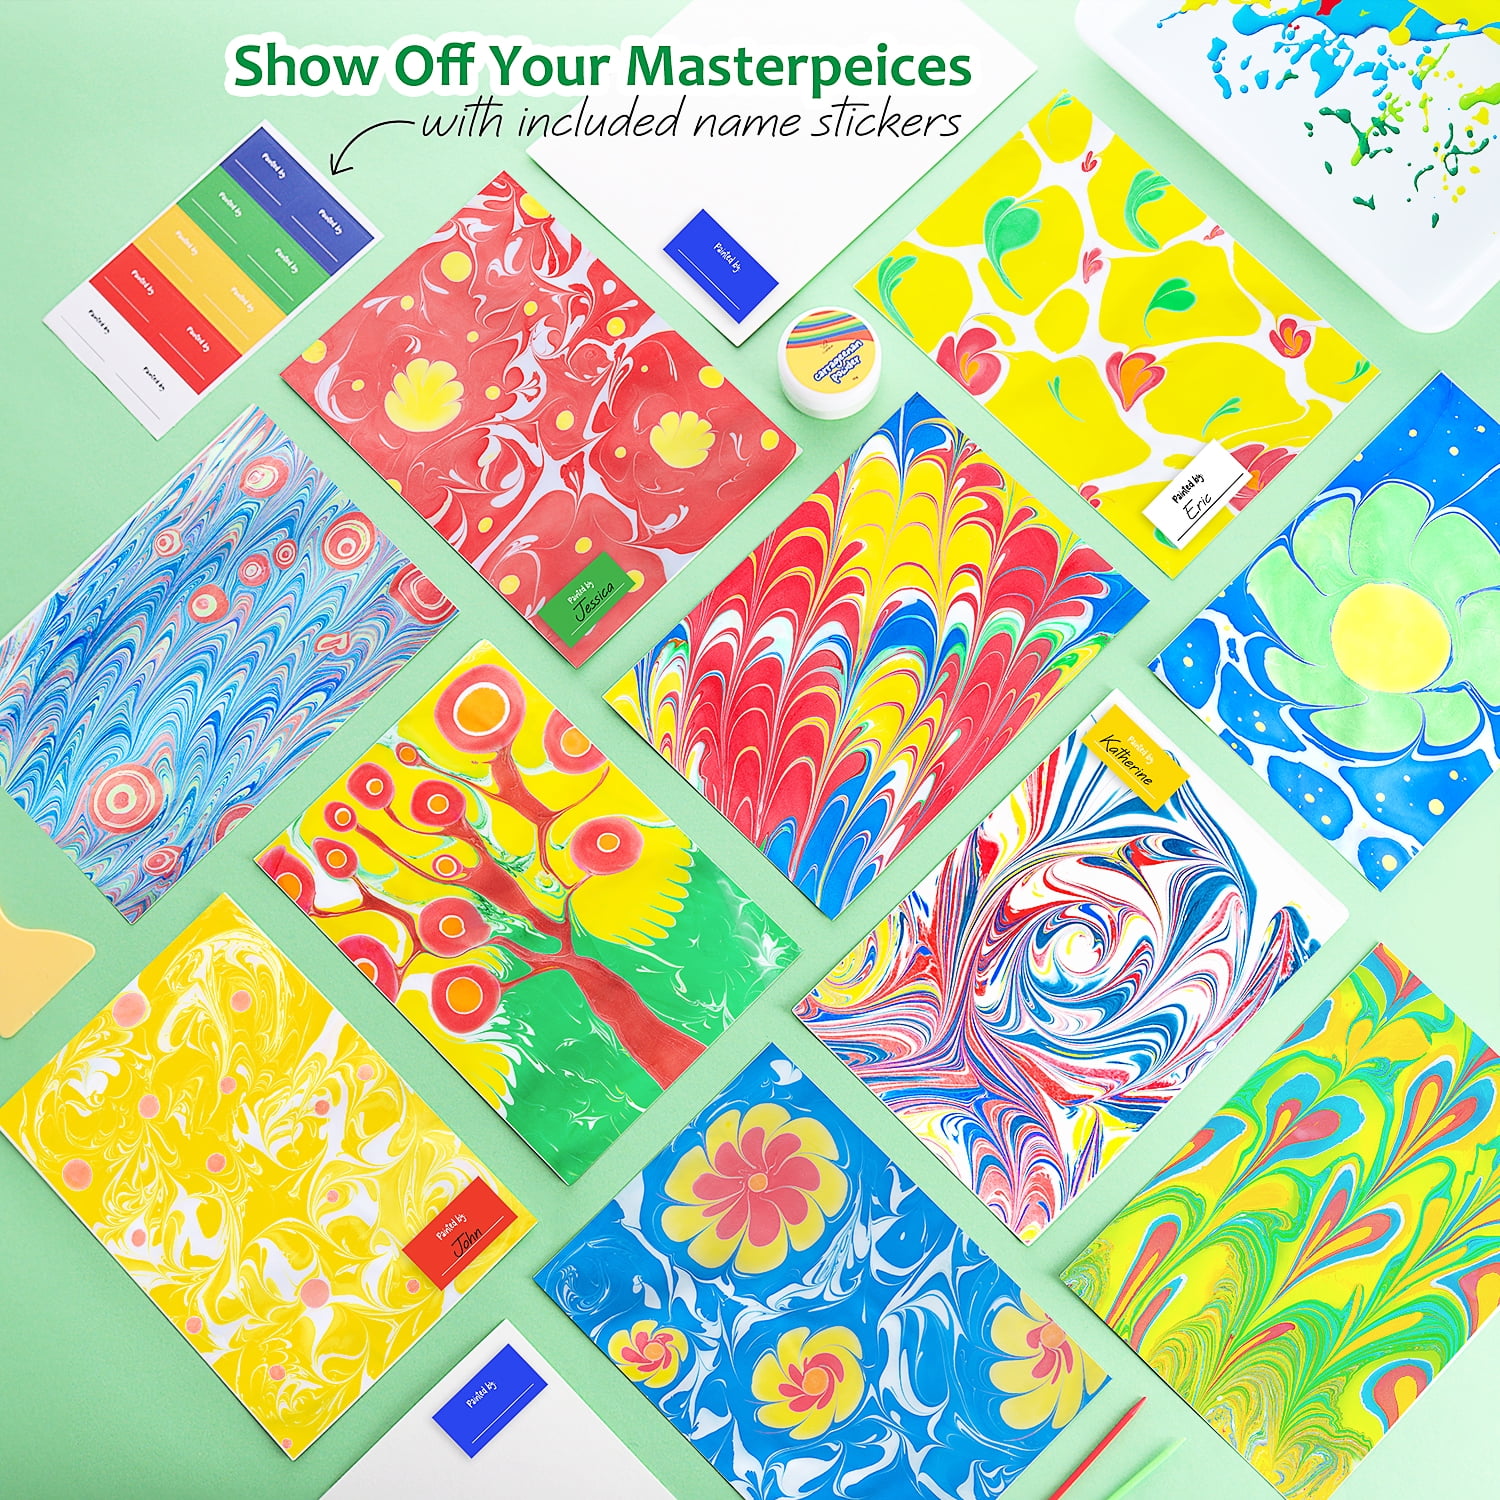 Water Marbling Paint Drawing Kit for Kids 8-12, Arts & Crafts for Girls &  Boys A